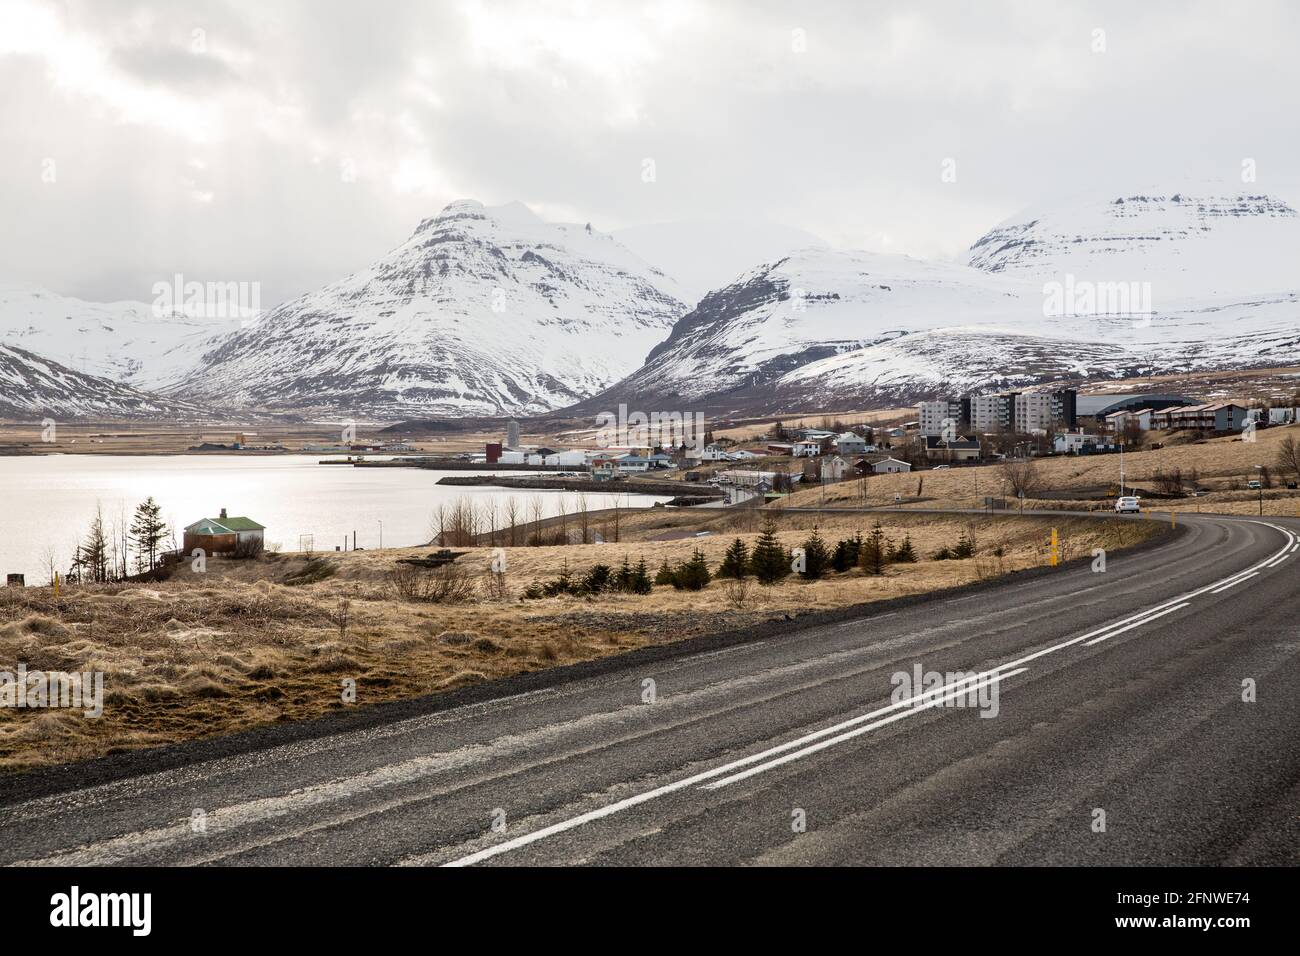 Reydarfjordur, Iceland - Filming Location for TV series Fortitude, Stock Photo